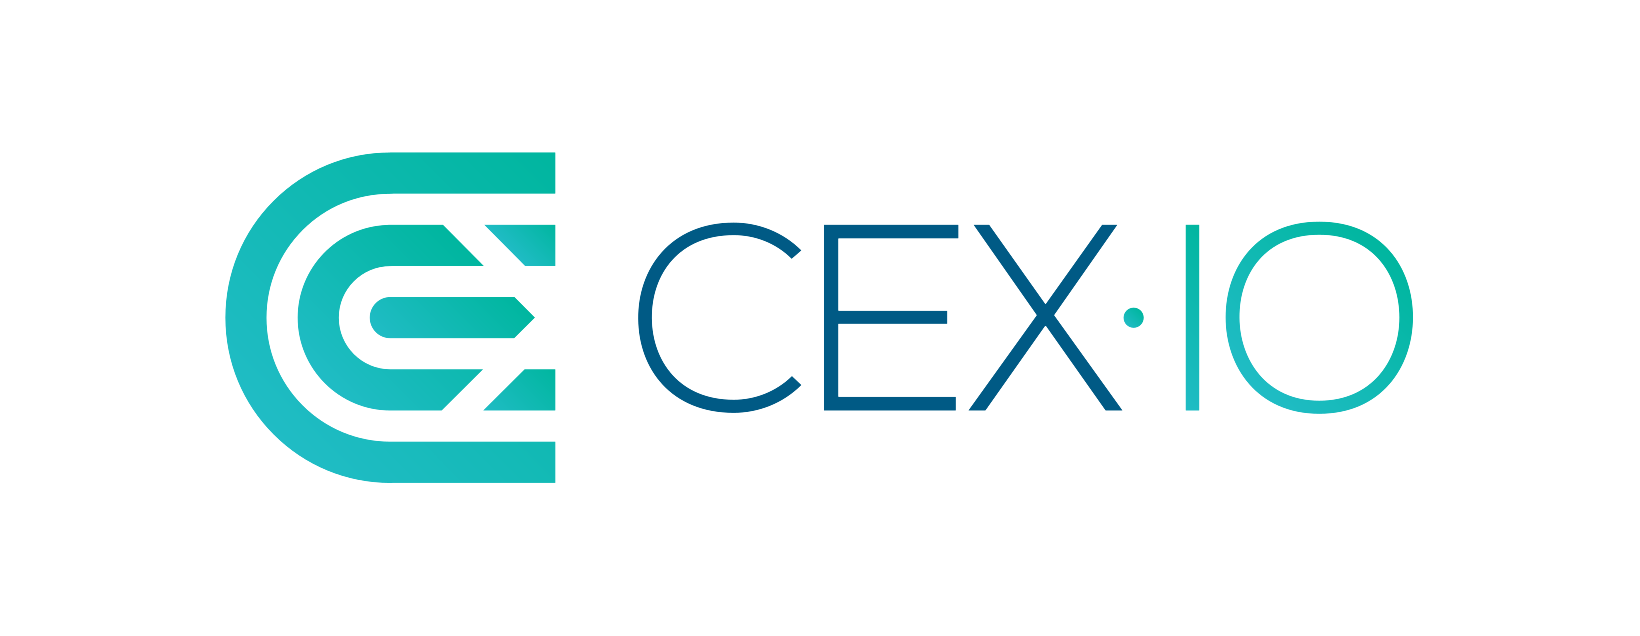 CEX.IO Limited Launches New Services, Including Crypto-Backed Lending, Following Approval from Gibraltar Authorities